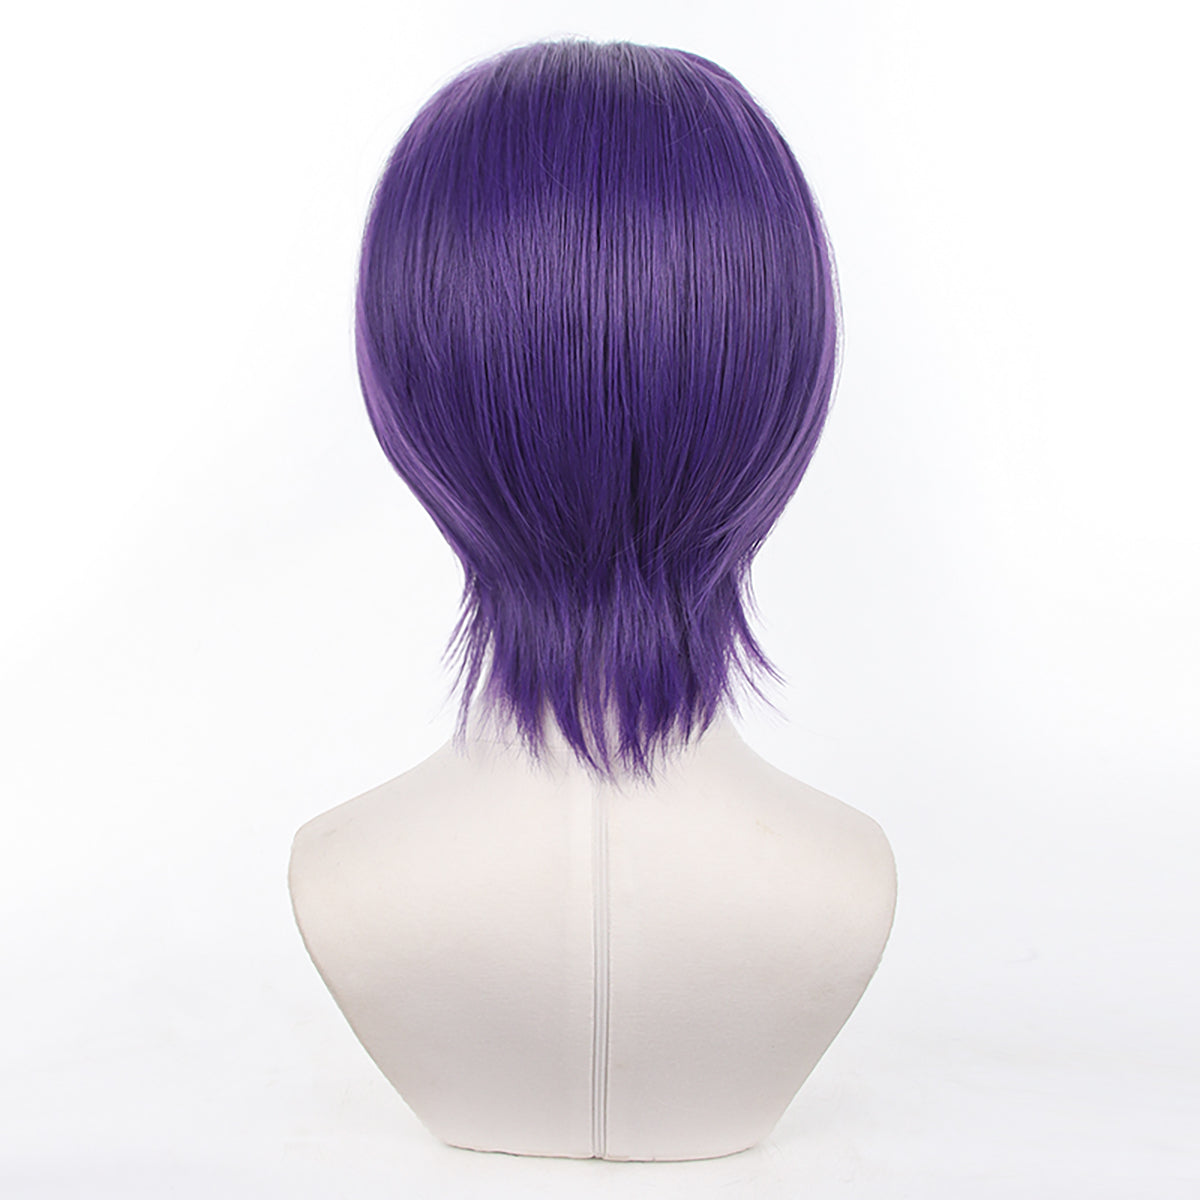 HOLOUN Blue Lock Manga Anime Cosplay Wig Reo Rose Net Synthetic Adjustable Size Short Version Party Gift